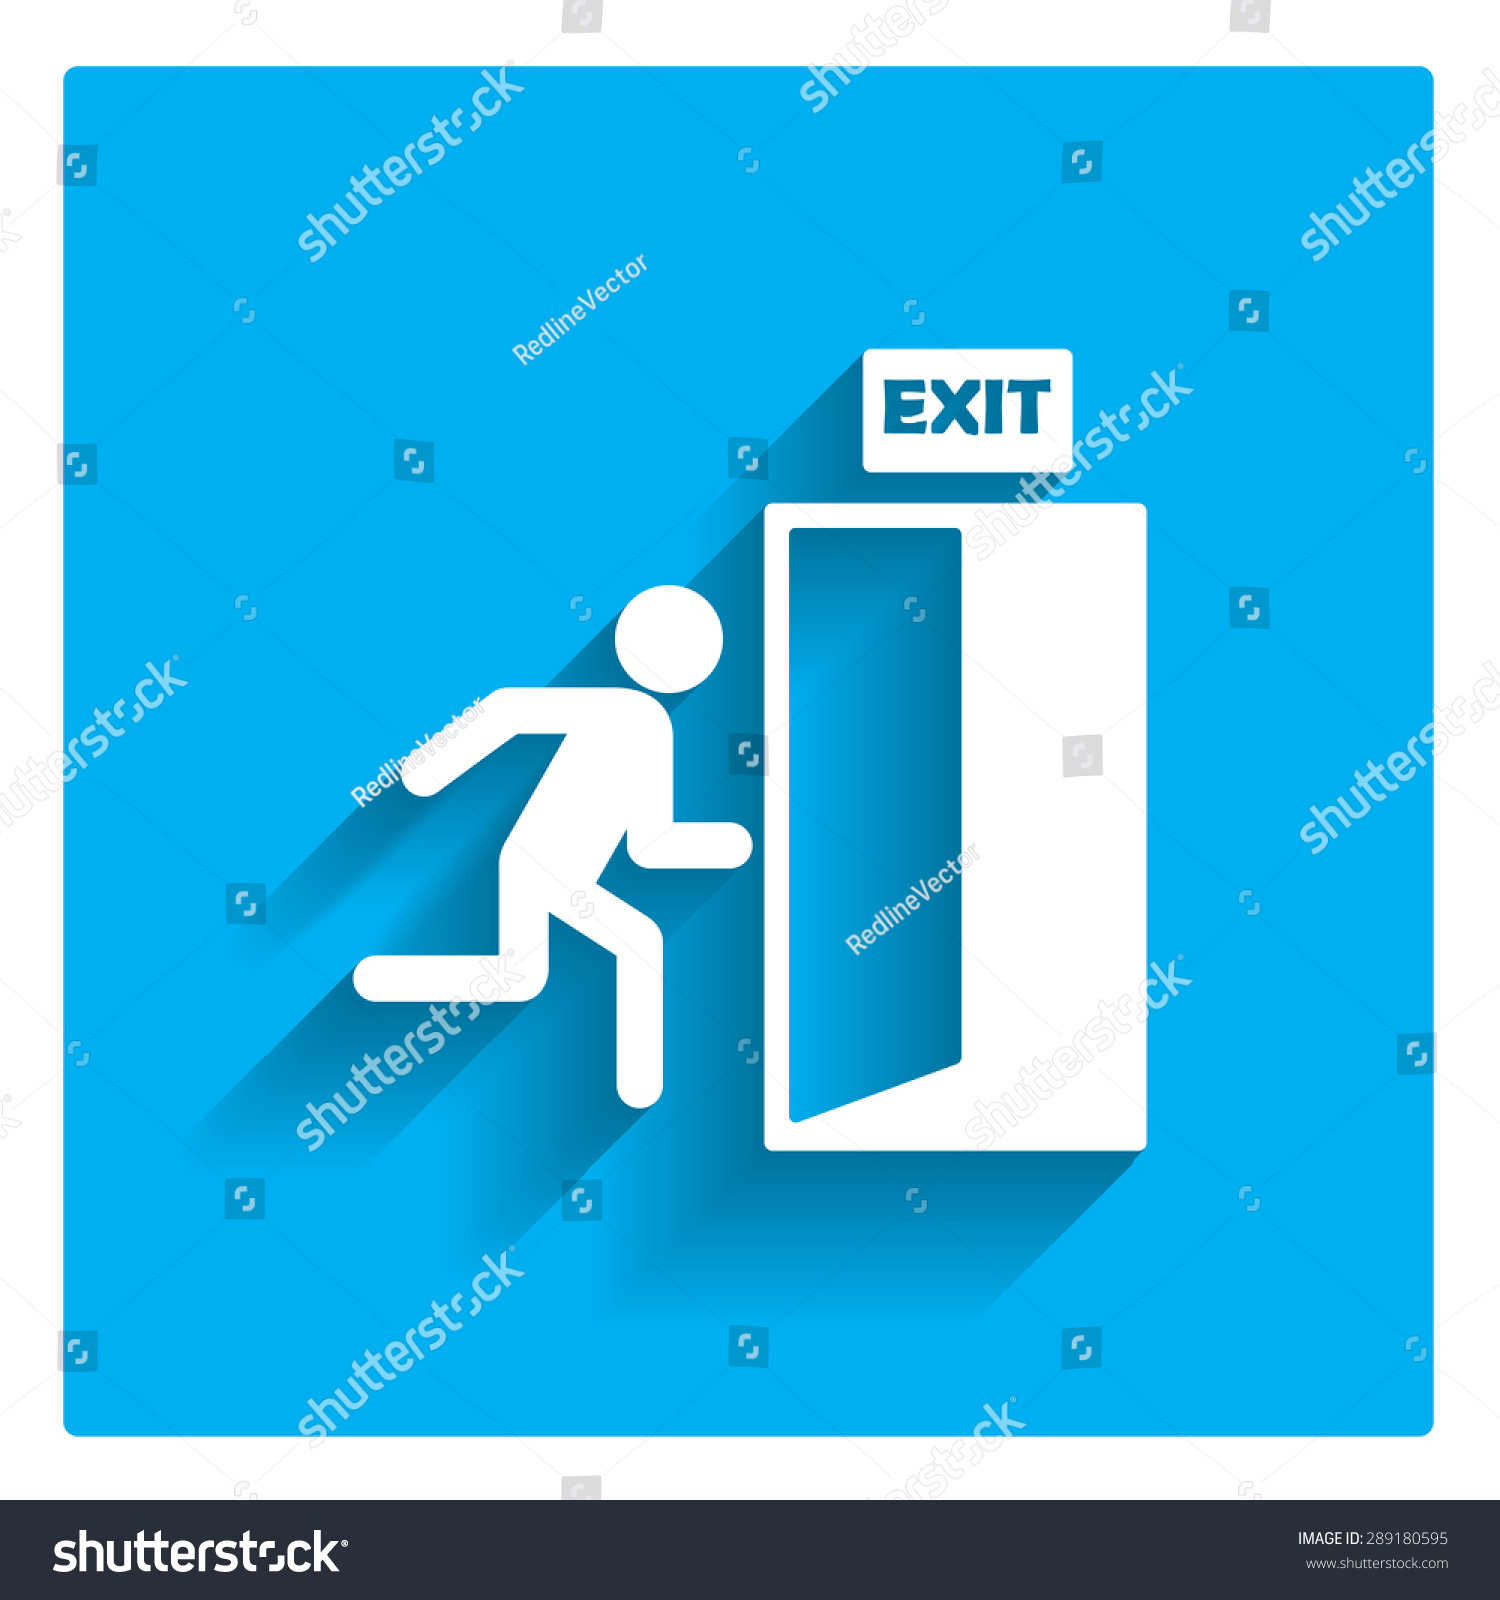 Icon Exit Sign Man Figure Running Stock Vector 289180595 - Shutterstock